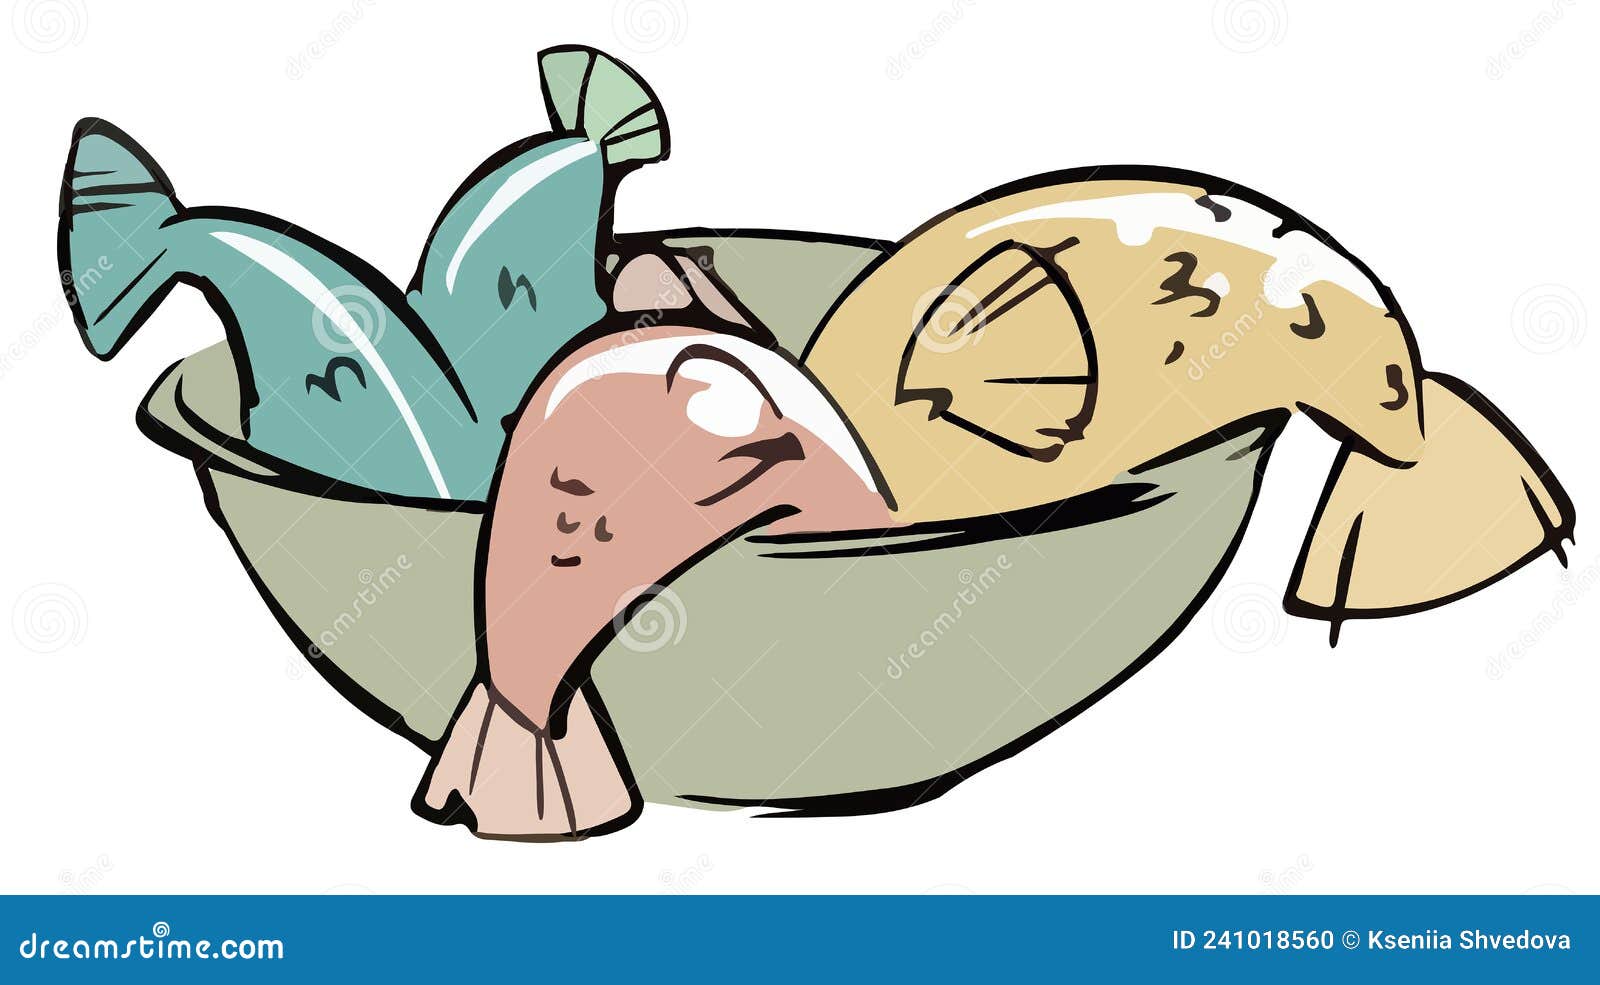 Vector Cartoon Clipart Fish in a Plate. Fish Tails in a Plate